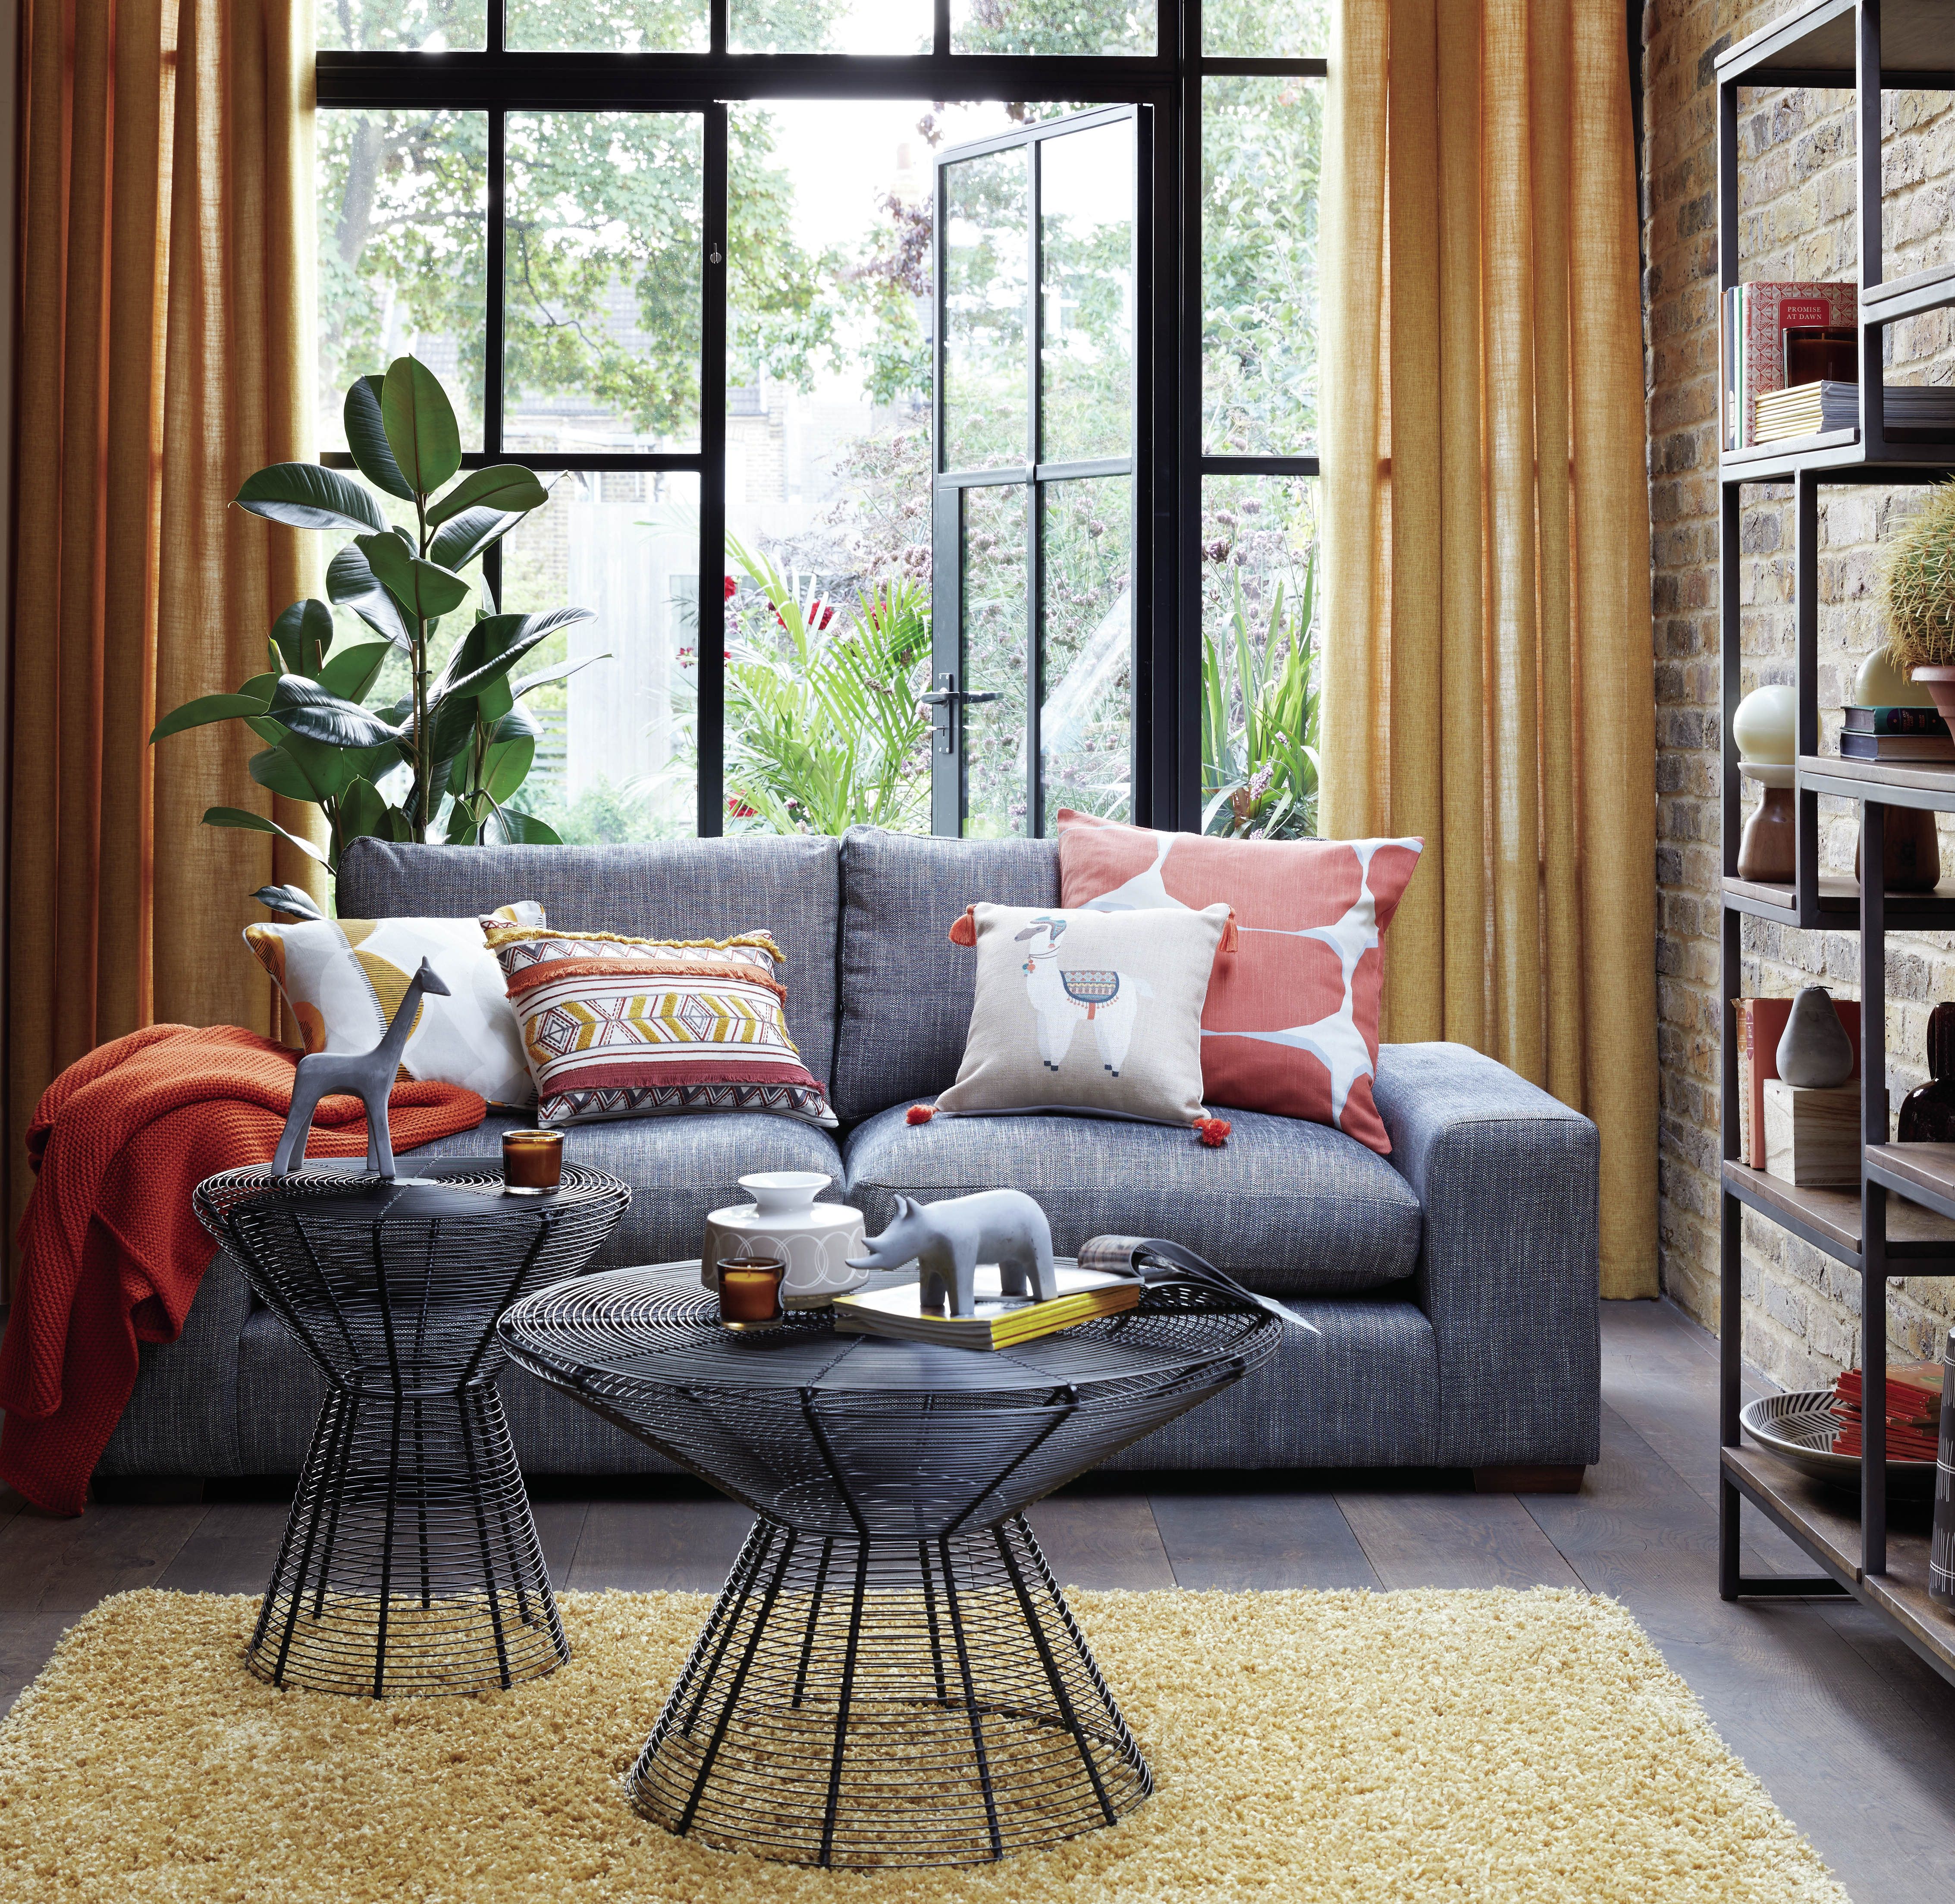 5 Design Tricks For Small Living Rooms Layout Ideas